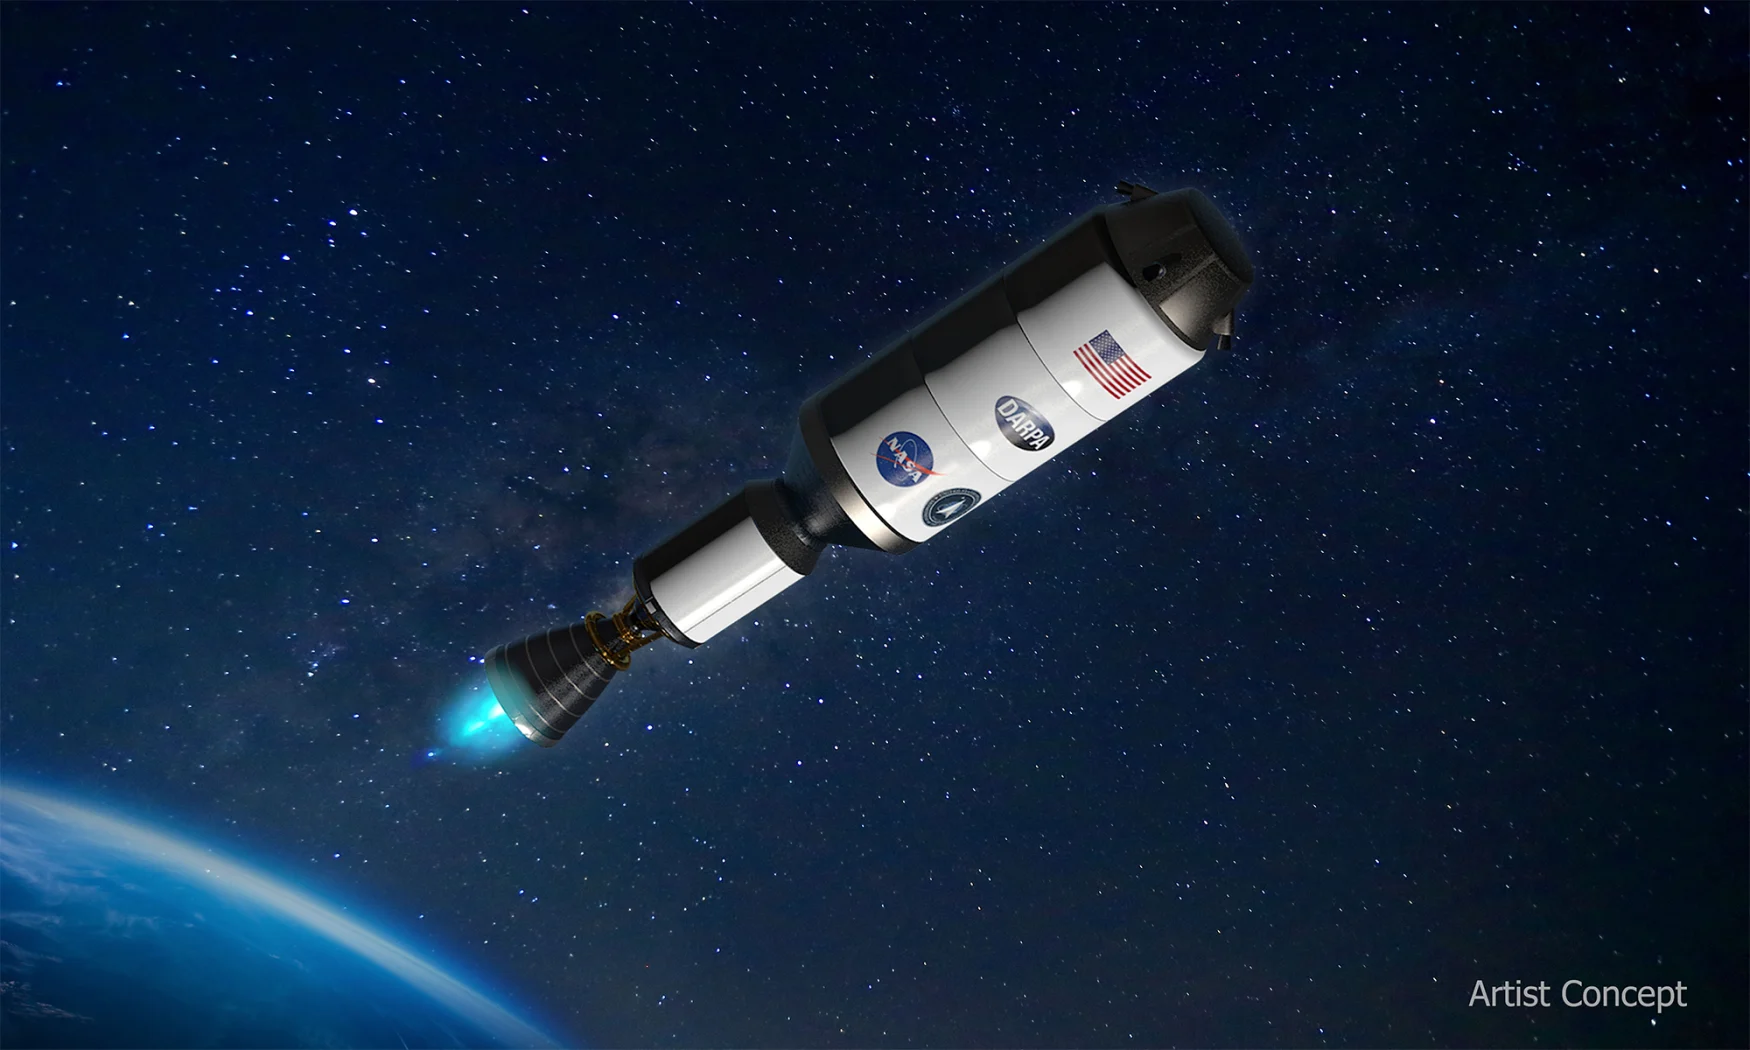 Artist concept of a nuclear powered rocket. The craft, which looks somewhat like an upside down flashlight, is primarily white with US, DARPA and NASA logos emblazoned on its side. Blue propellant emerges from its tail as a slice of the Earth is visible below.